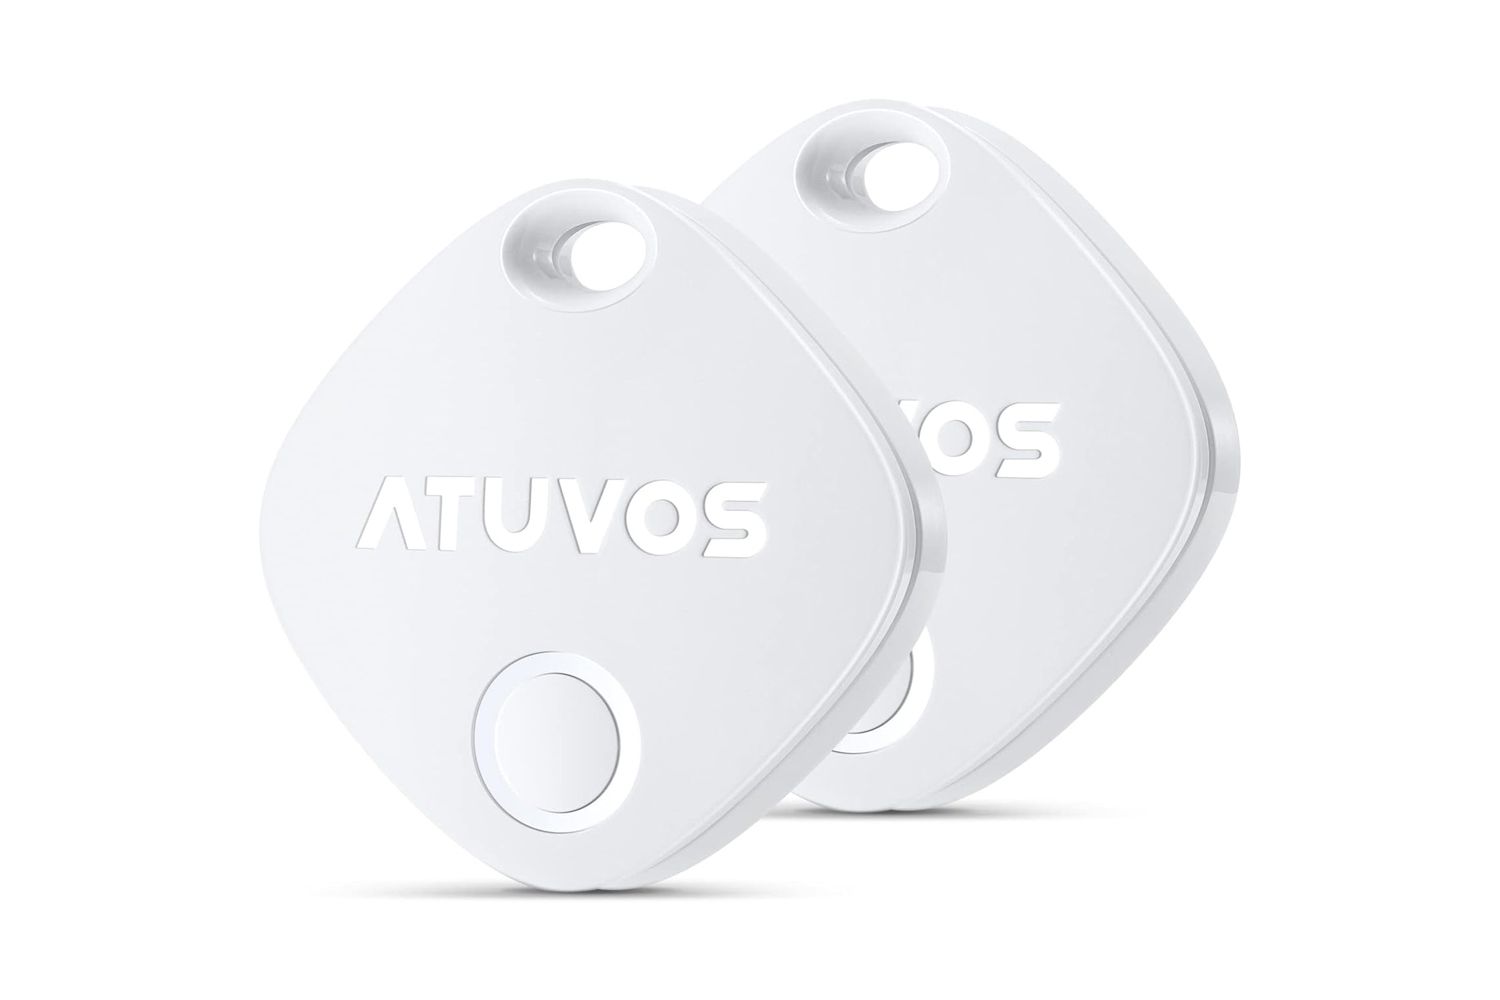 Atuvos Luggage Tracker (two pack)